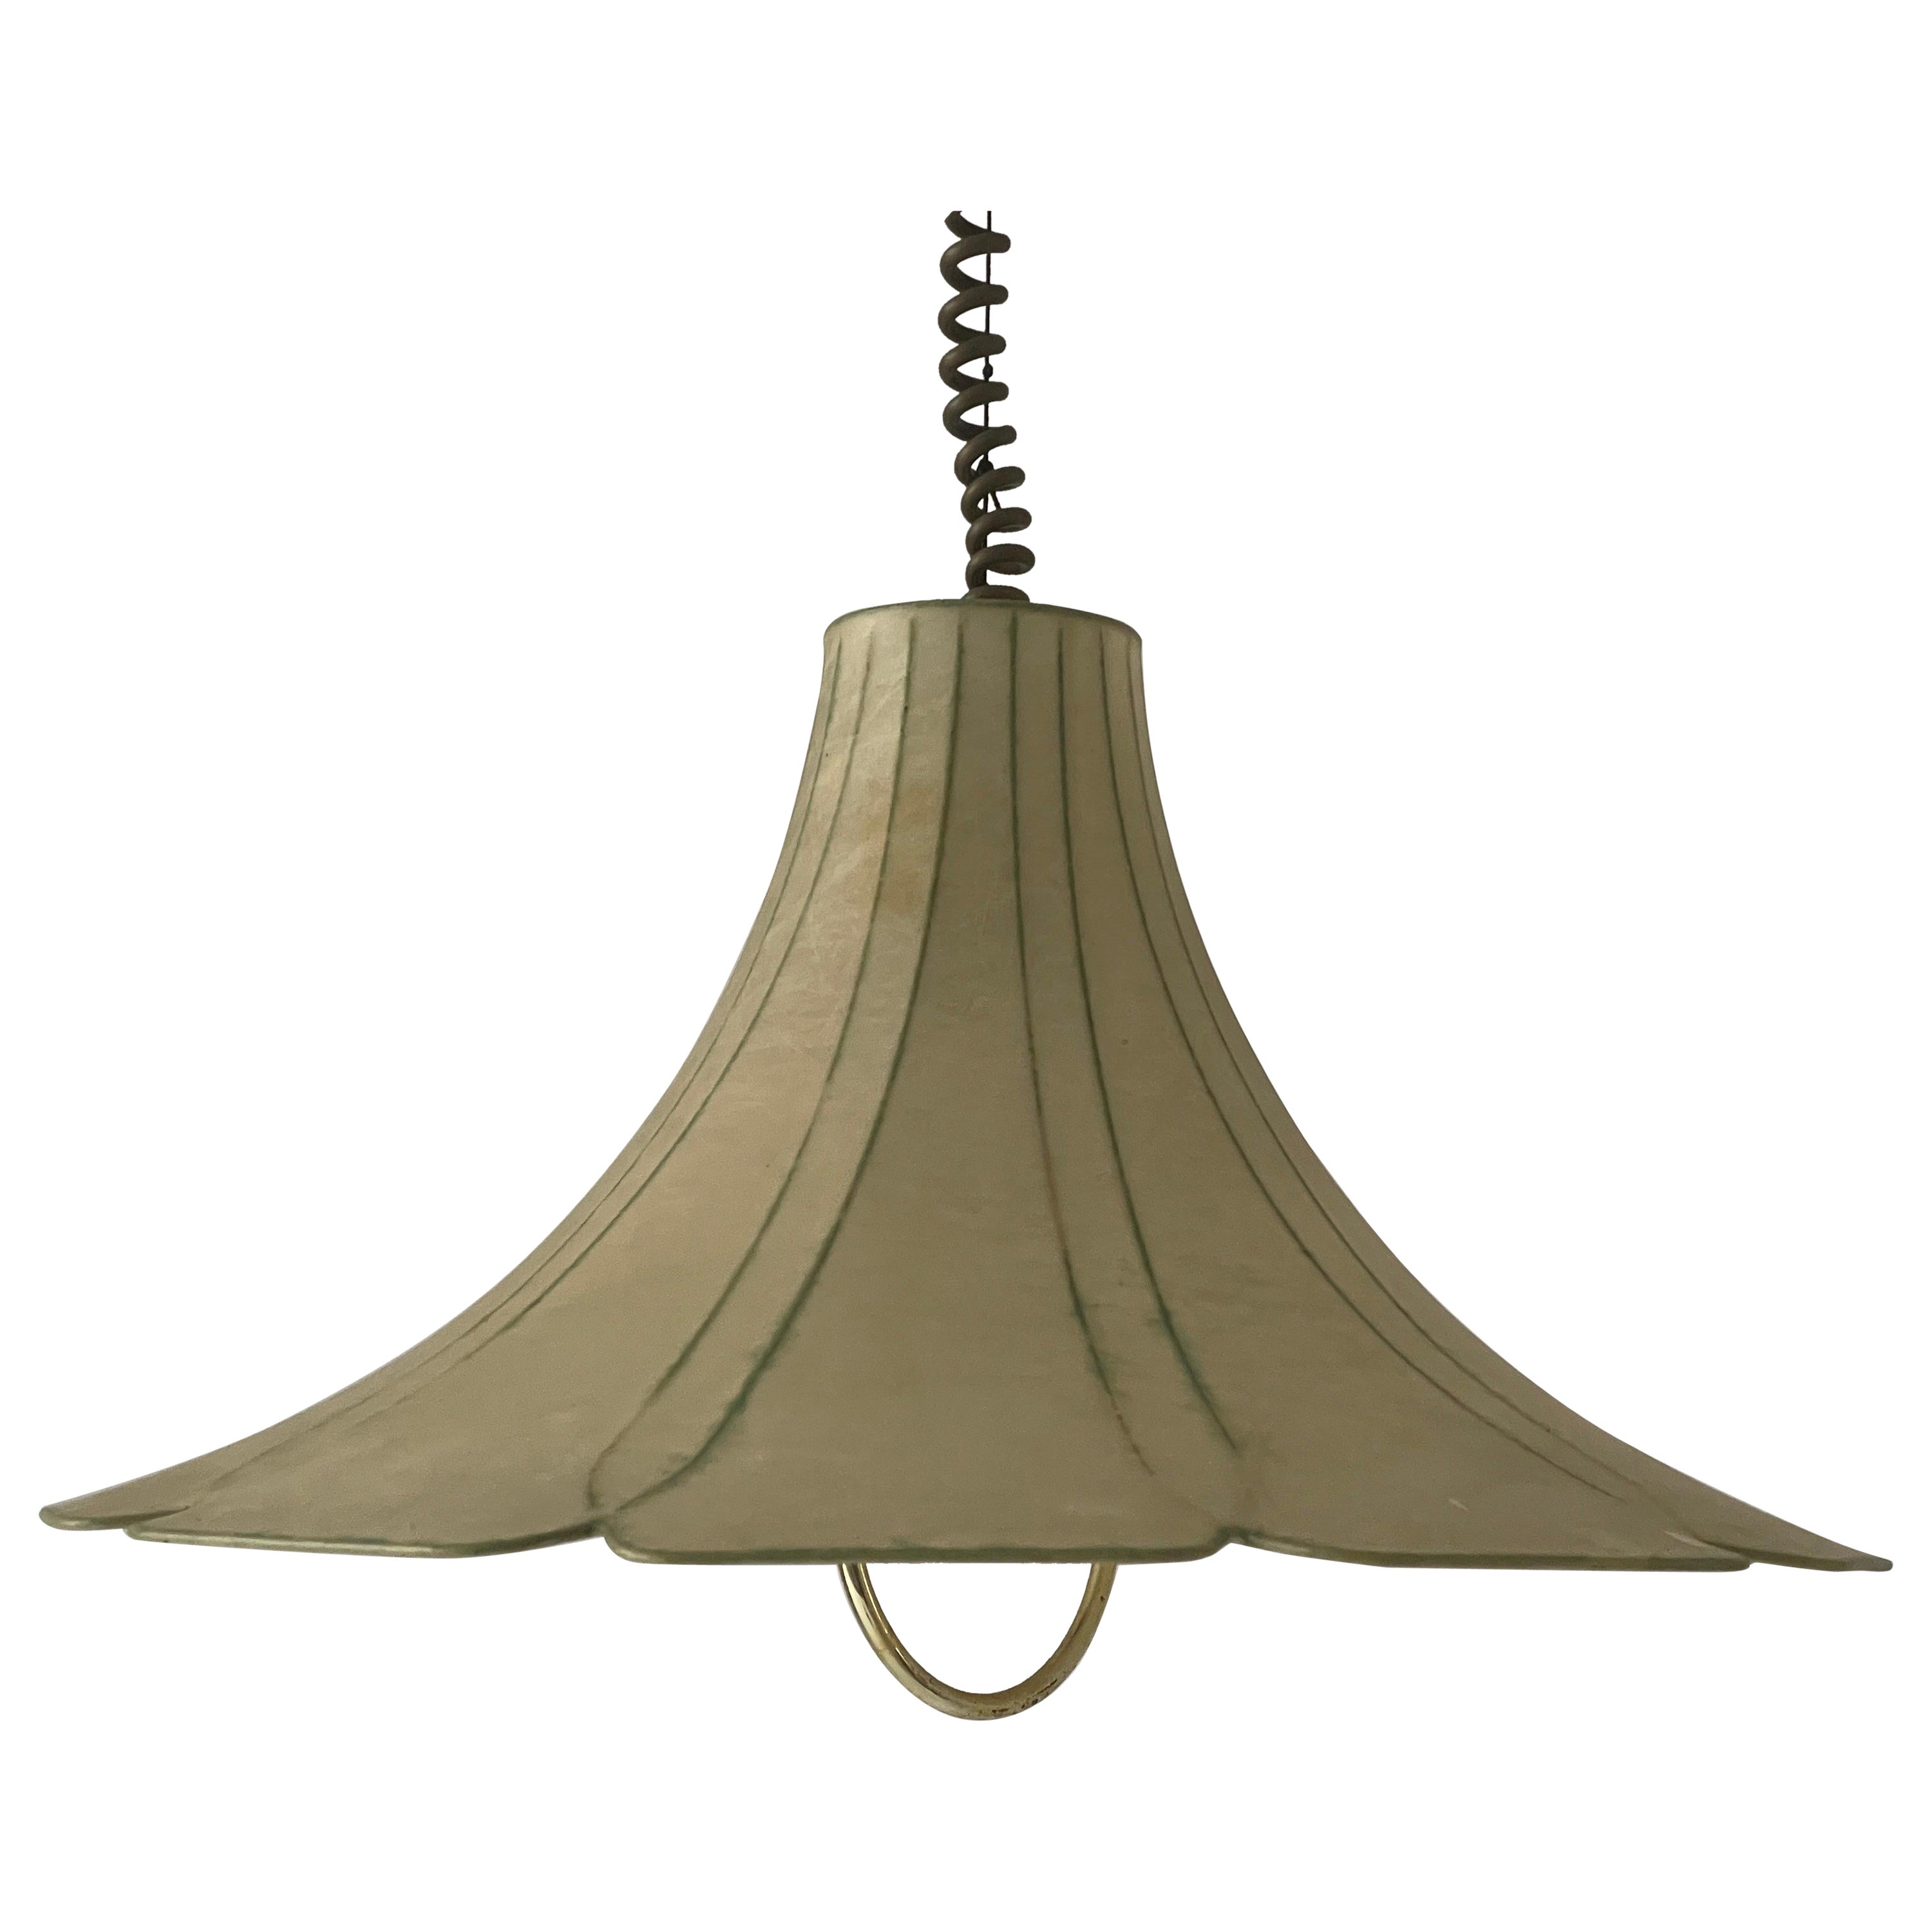 Flower Design Cocoon Pendant Lamp by Goldkant, 1960s, Germany